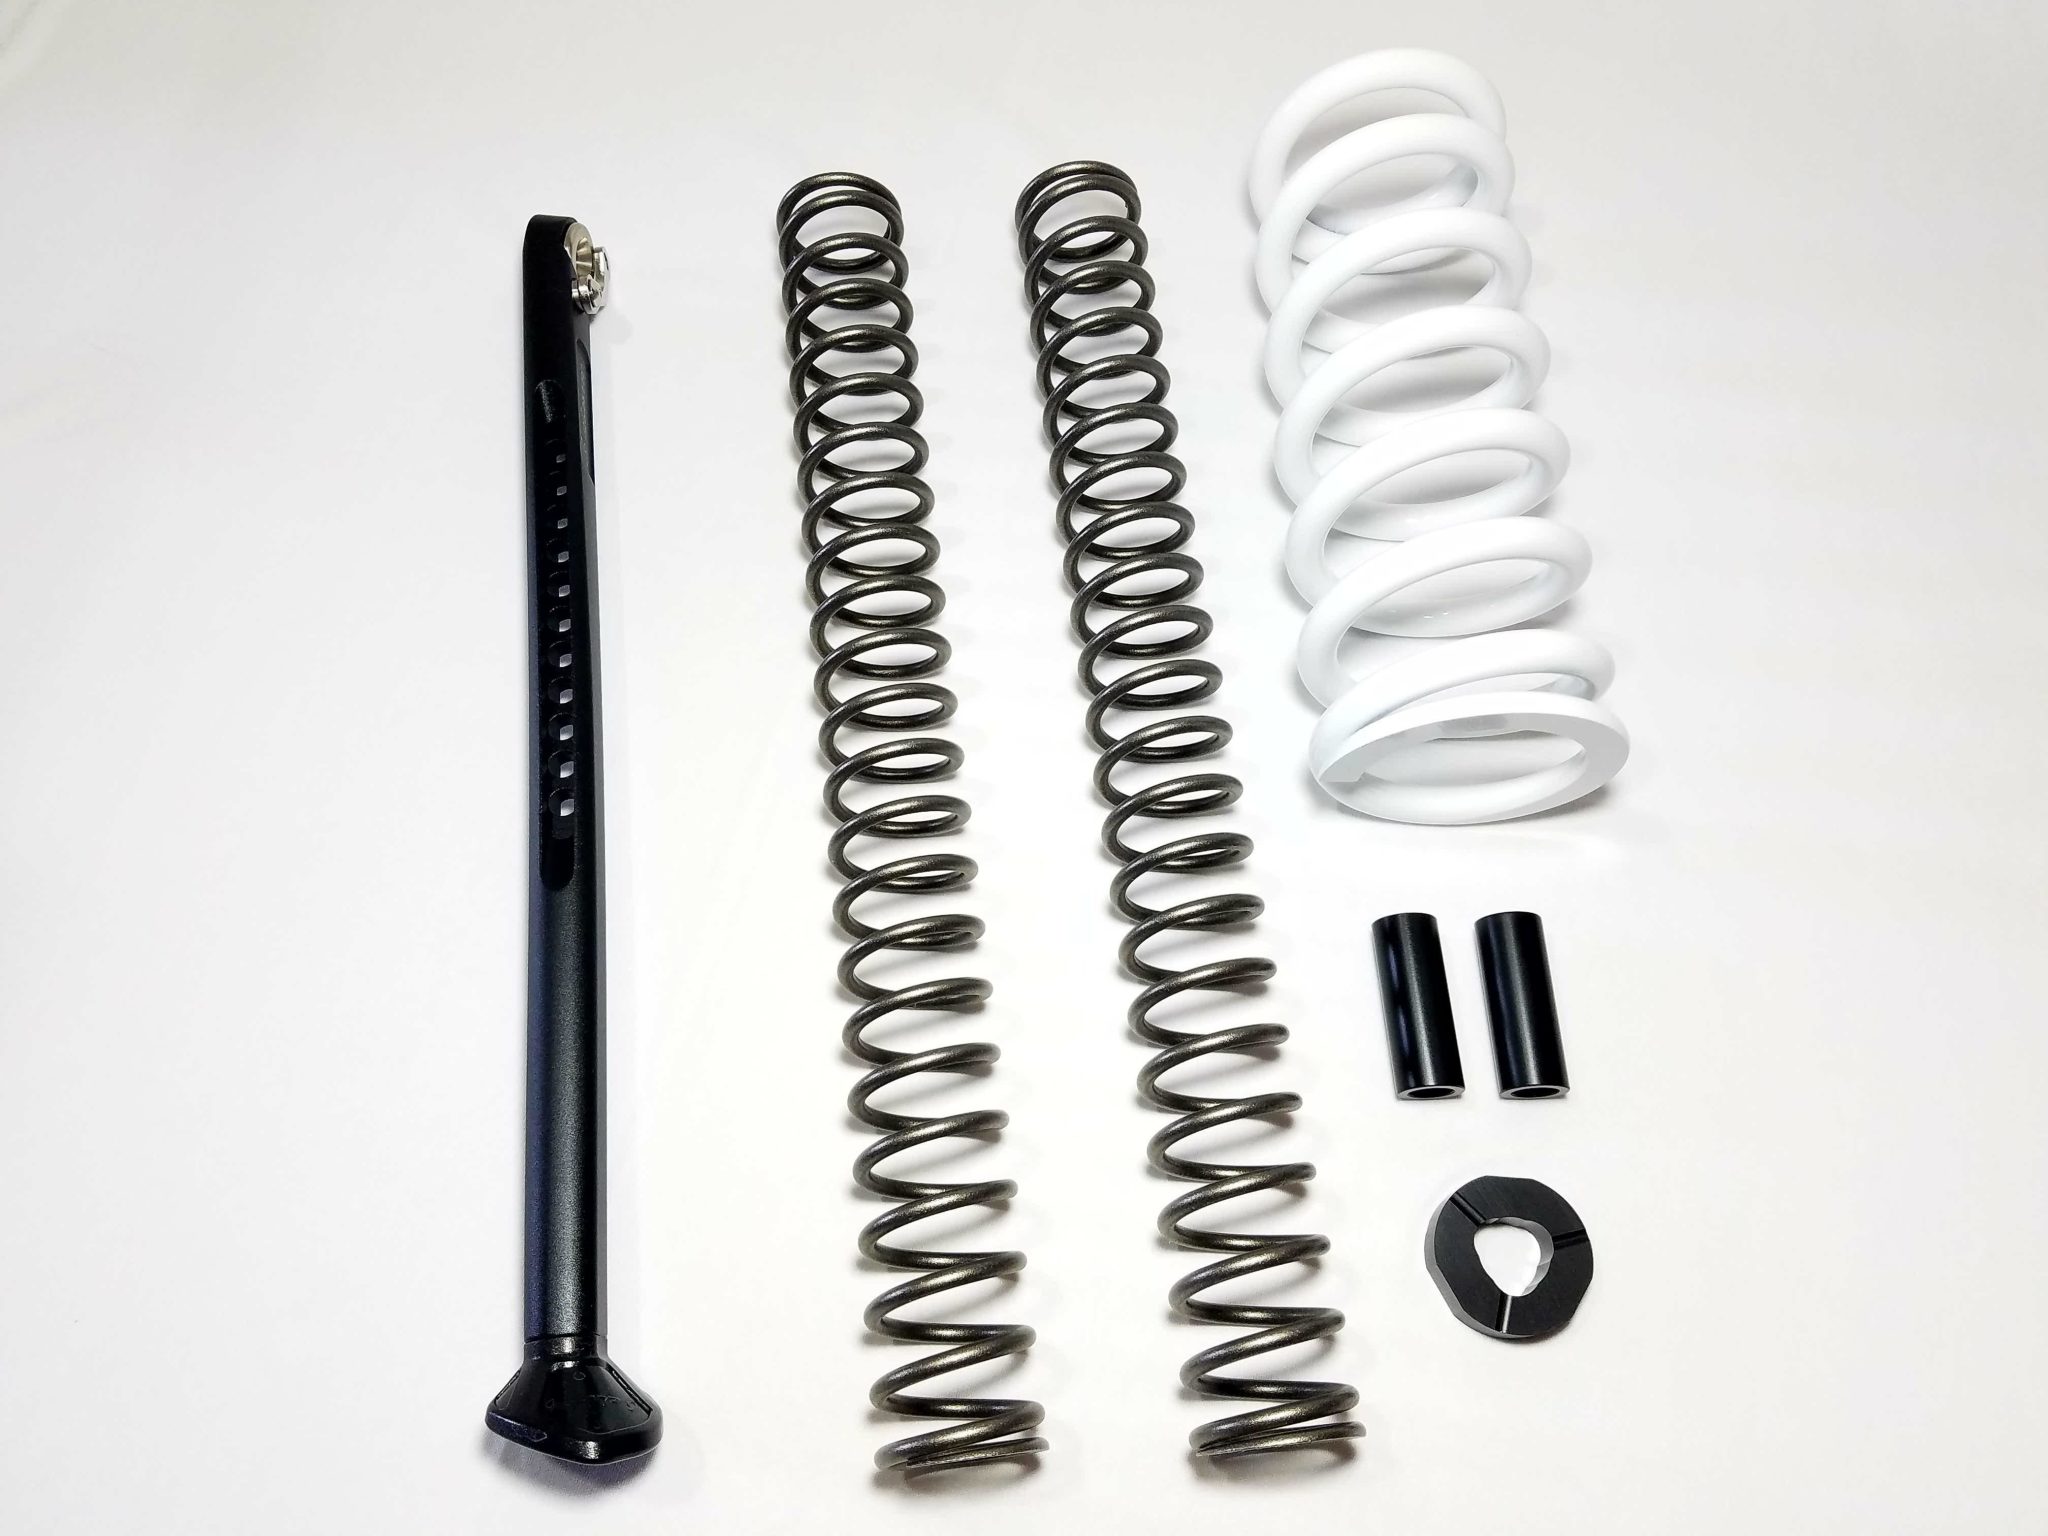 CNC Rear Suspension Lowering Kit 50mm For KTM 125 250 300 EXC Six Days 2008-2013